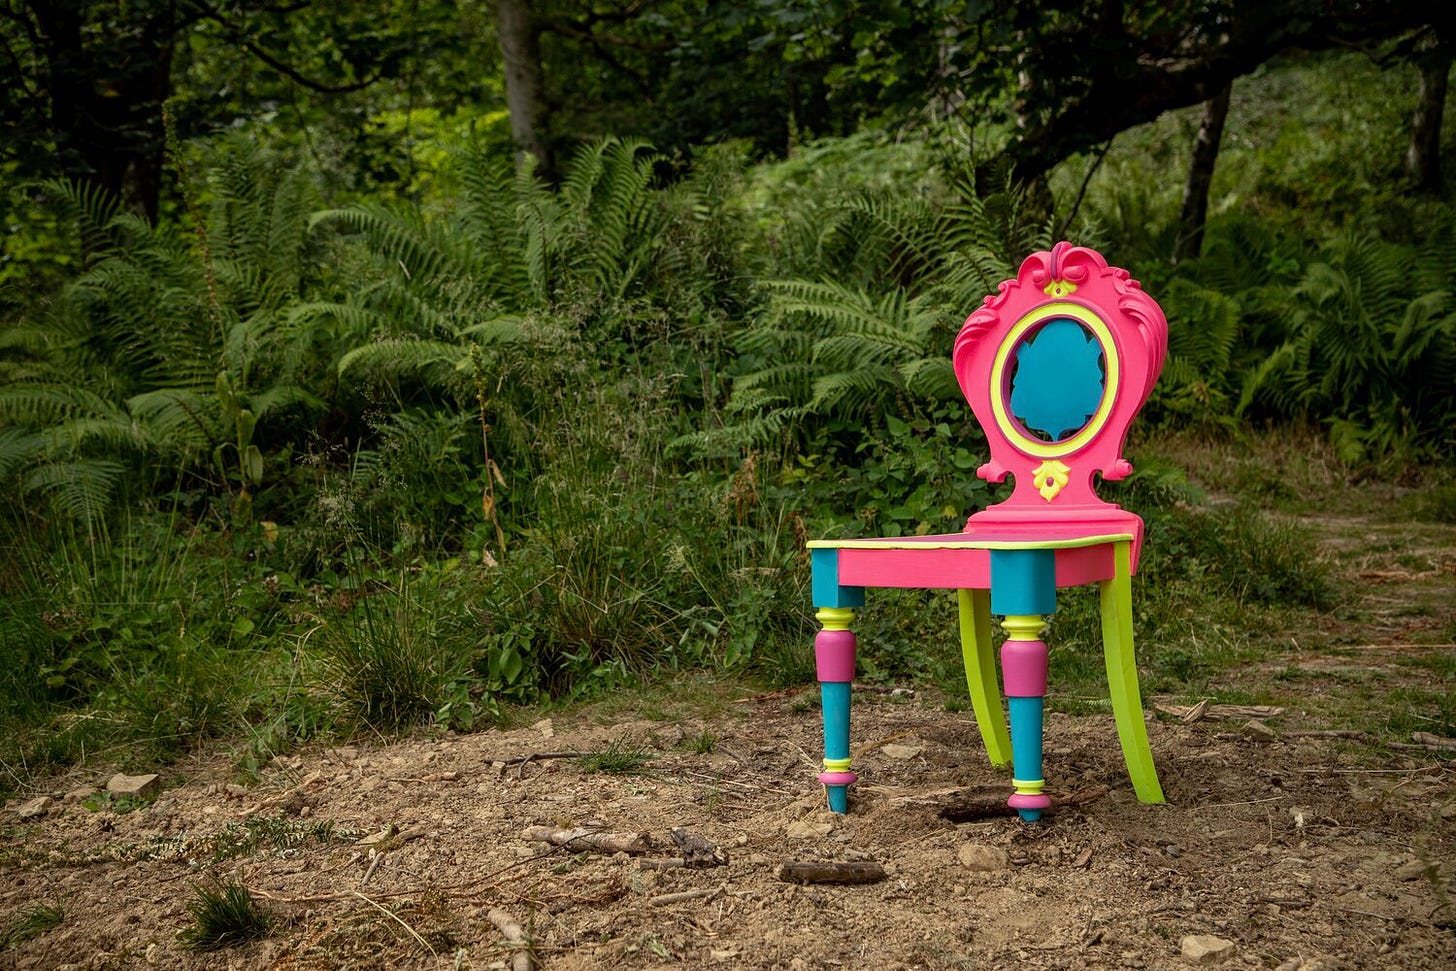 An antique chair painted in vibrant neon colours surrounded by woodland and ferns